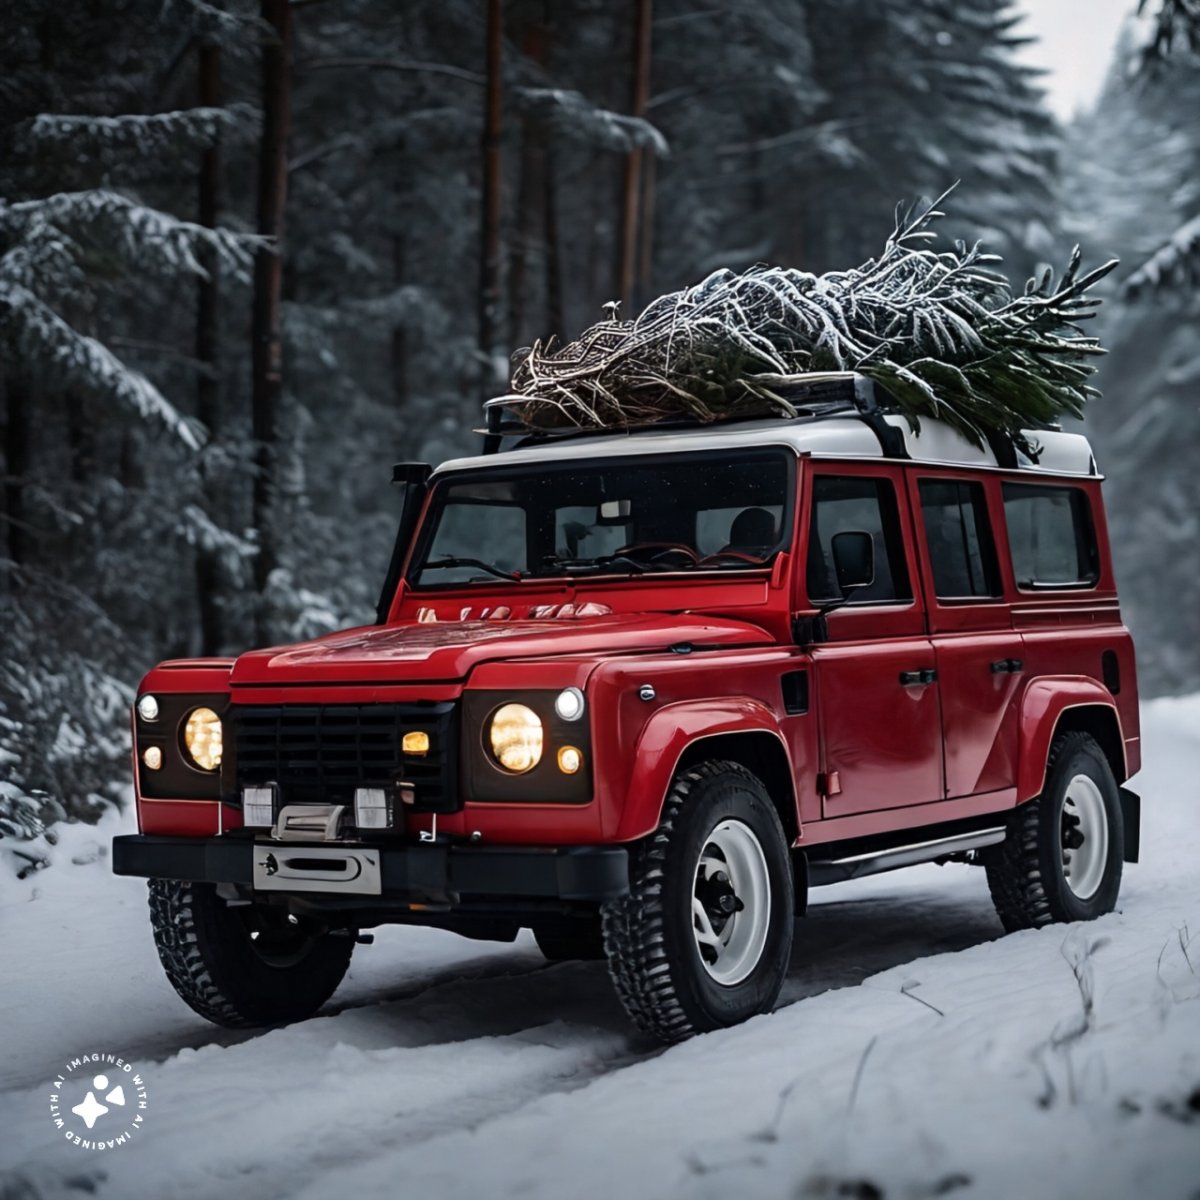 A-classic-Land-Rover-Defender-110,-red-in-color,-with-a-Christmas-tree-strapped-down-to-its-r...jpeg